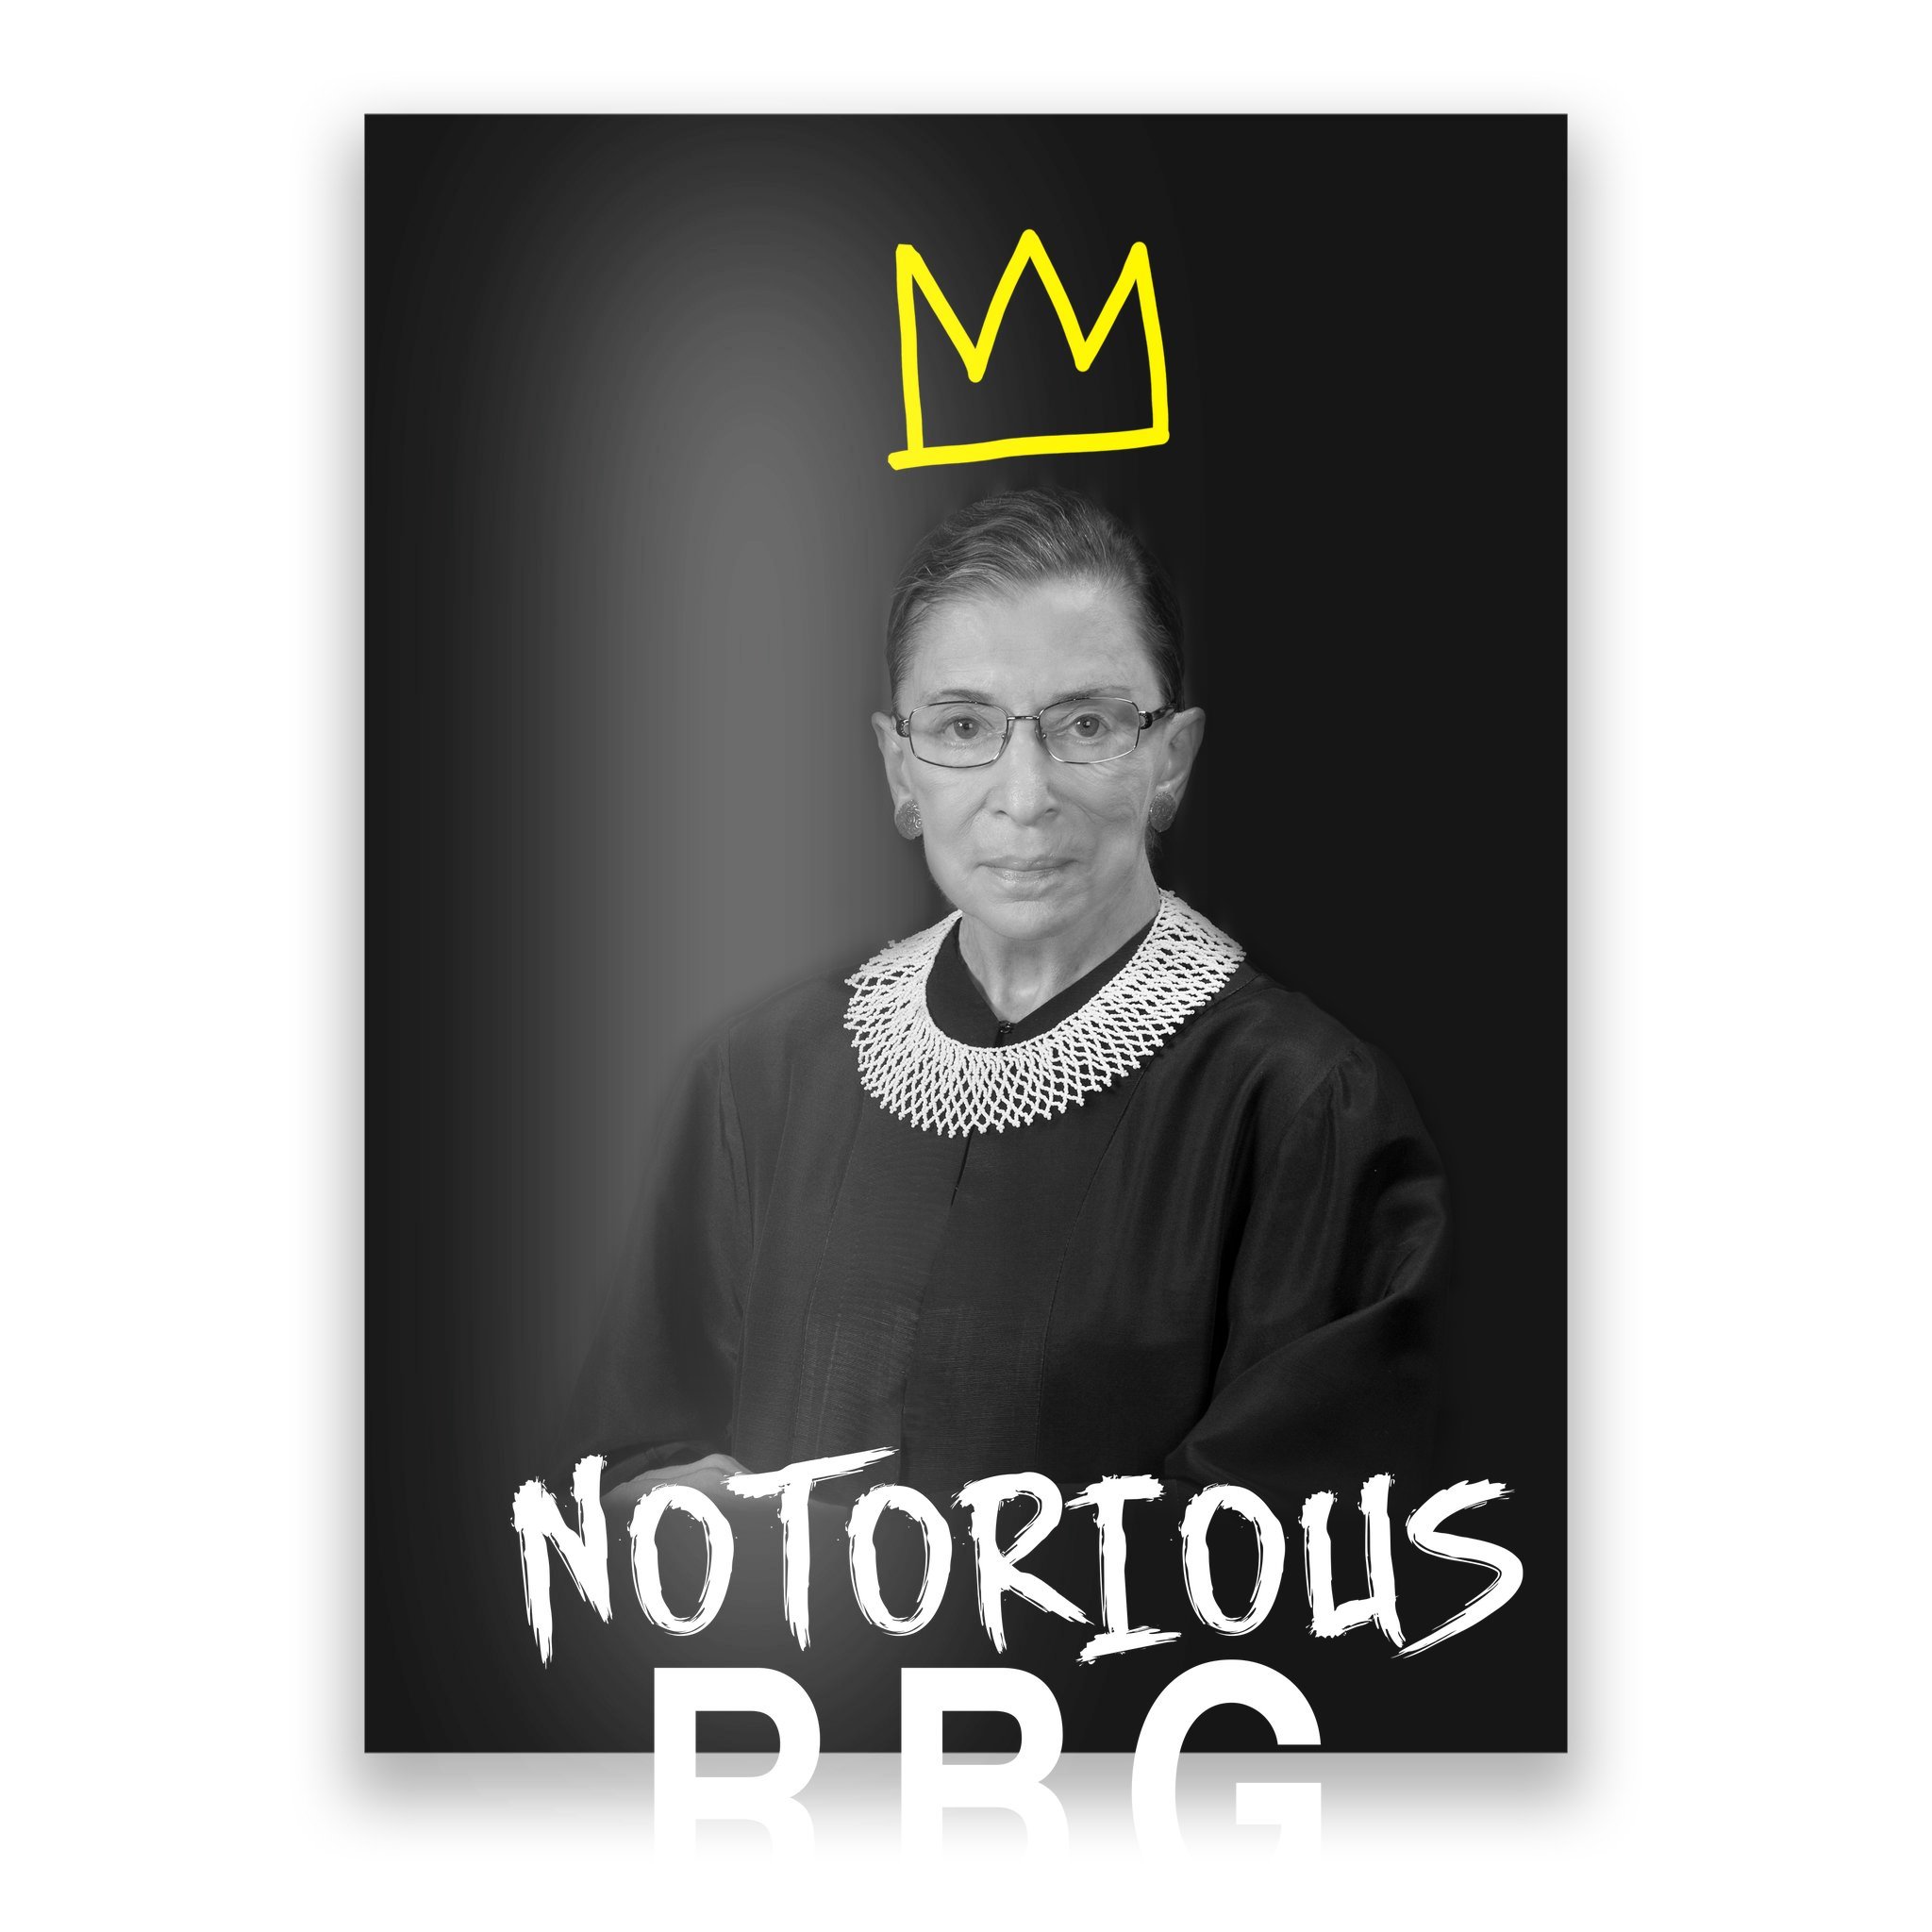 RUTH BADER GINSBURG GLOSSY POSTER PICTURE PHOTO PRINT SUPREME COURT WOMEN 